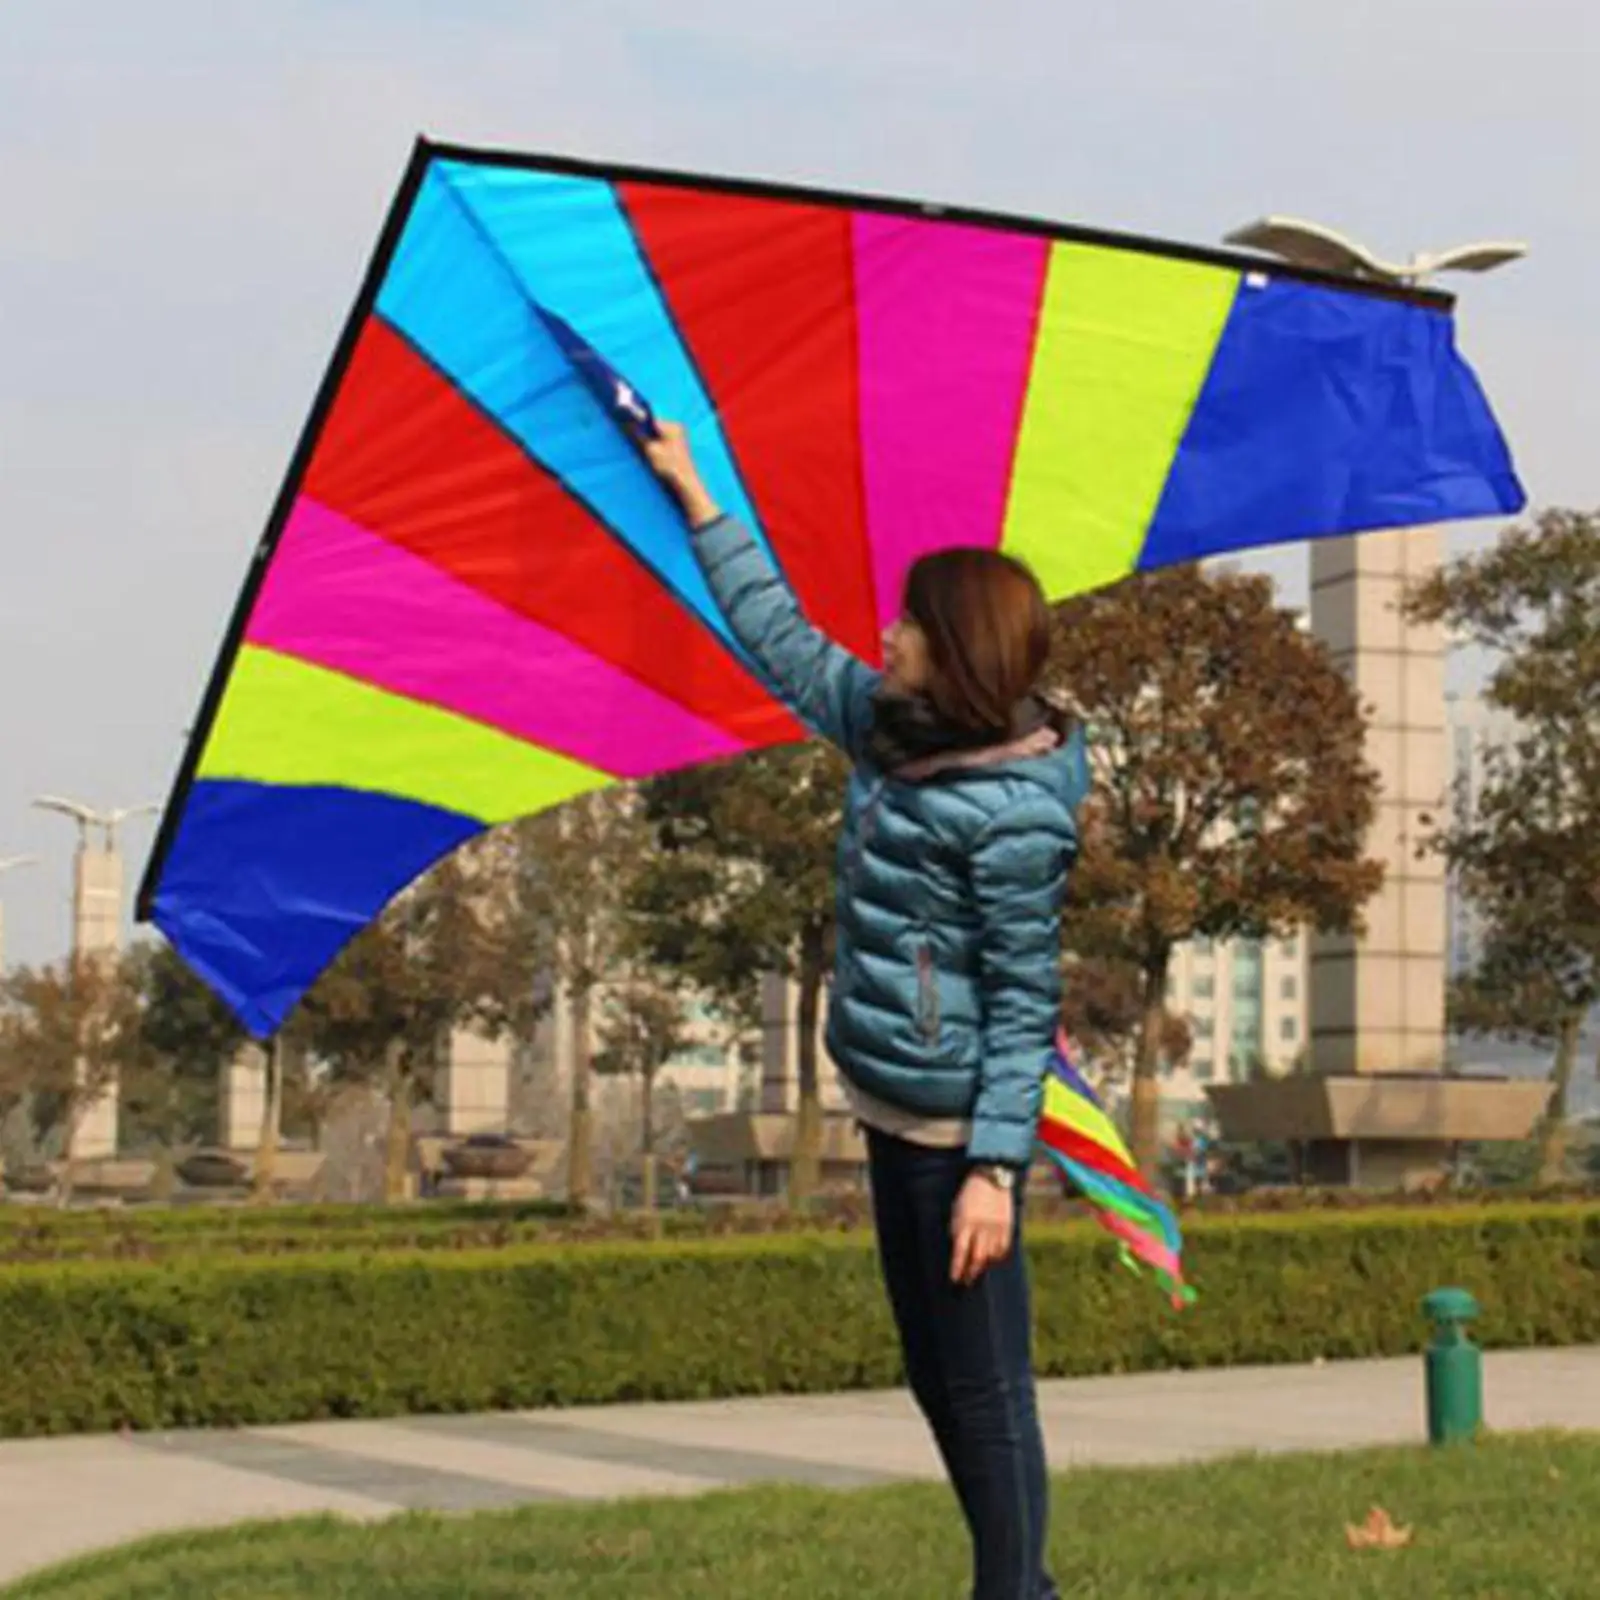 Rainbow Delta Kite Single Line Triangle Kite with Tail Huge Easy for Trips